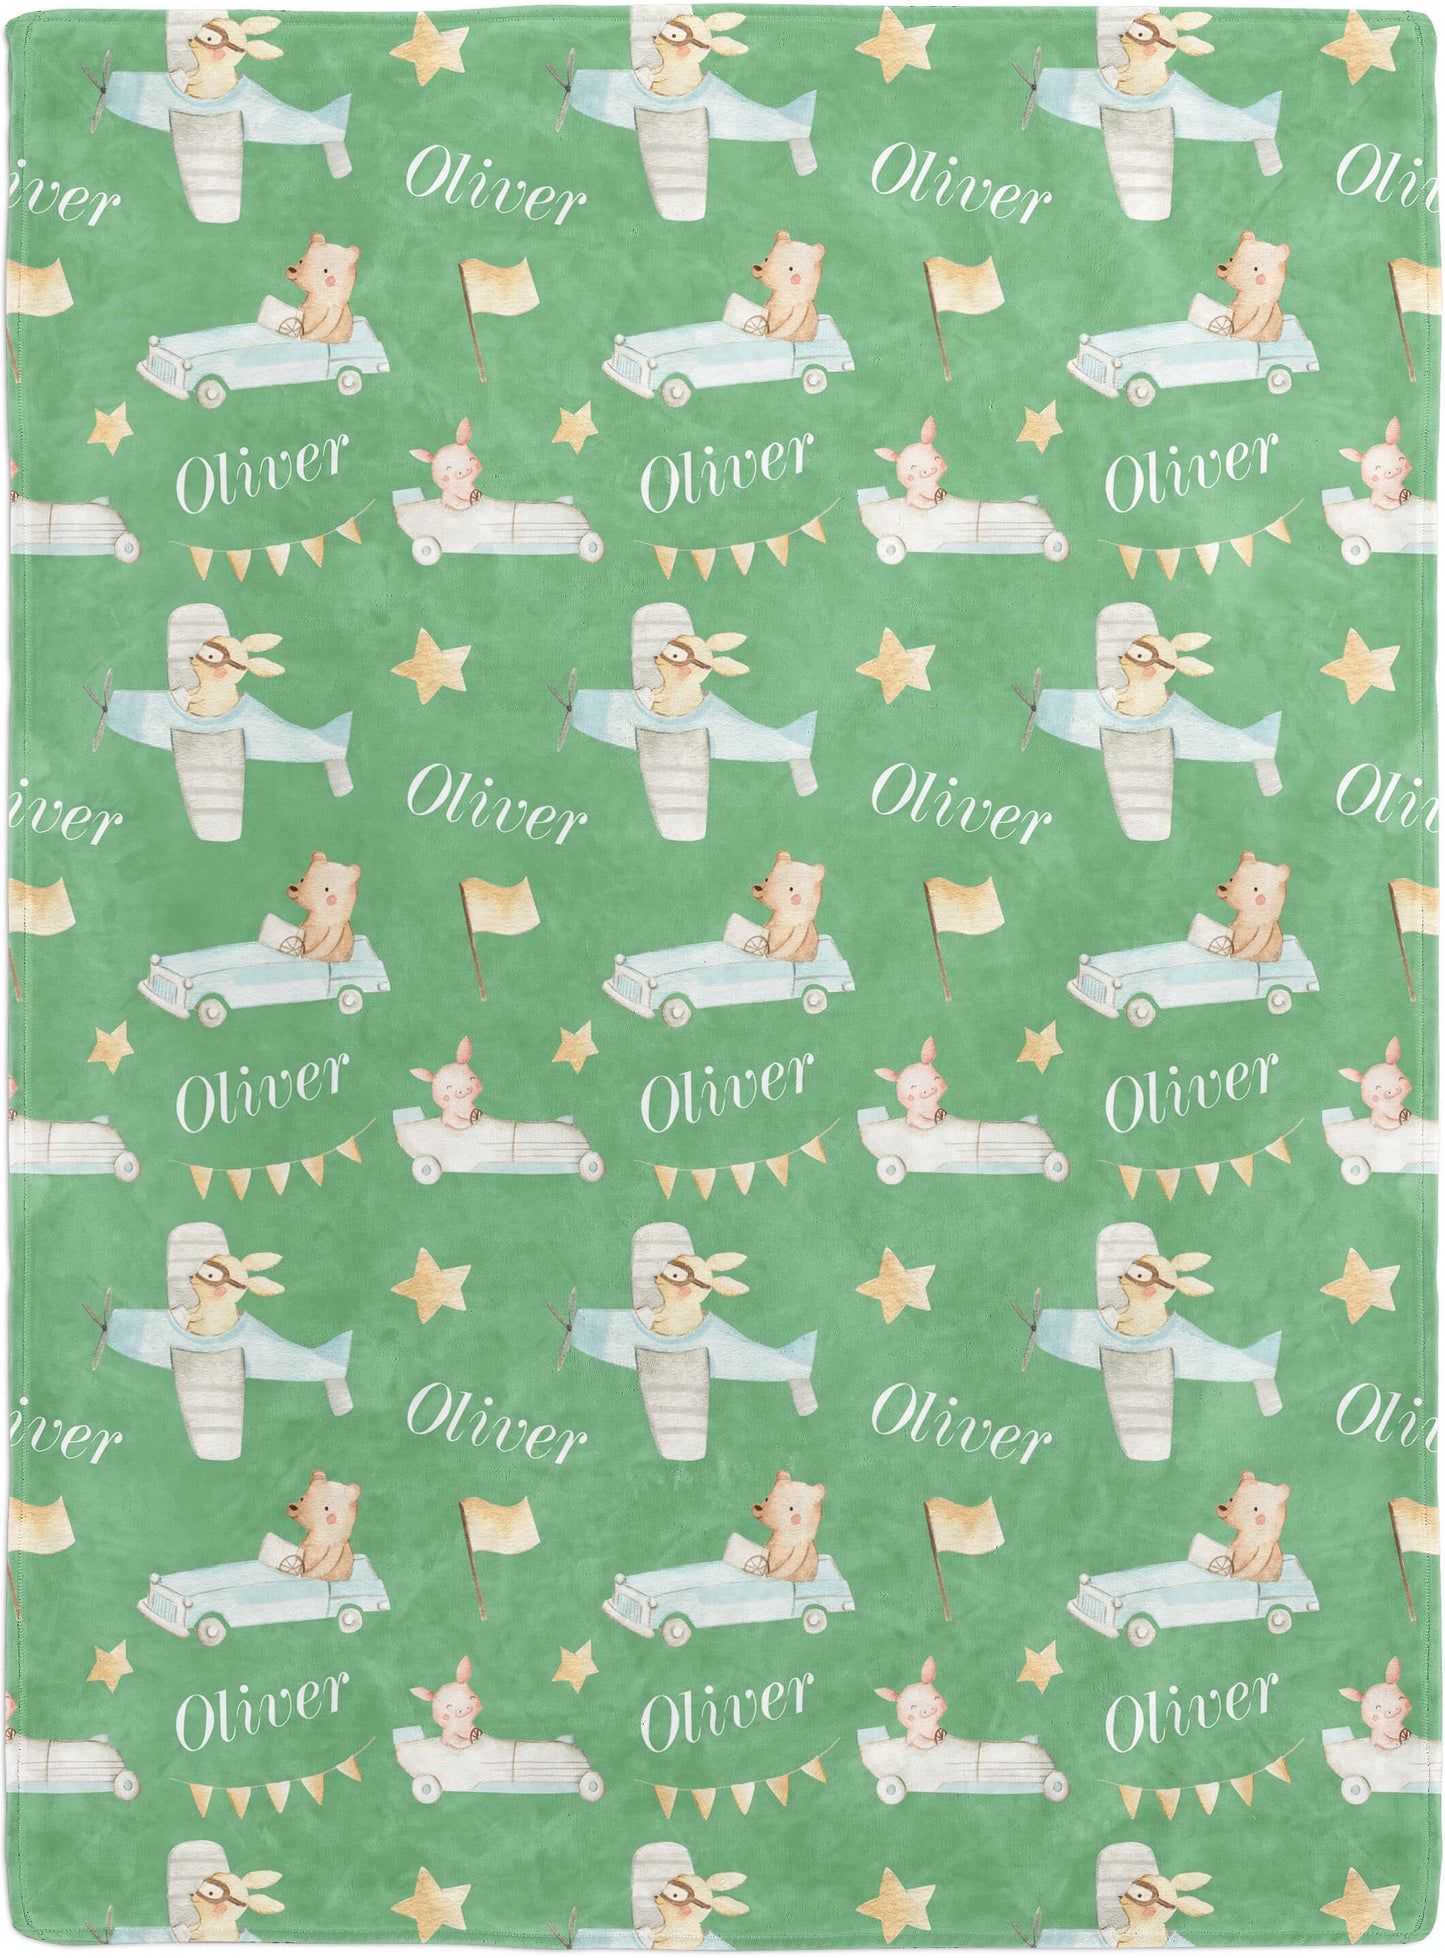 Cars and Planes - Personalized Baby Blanket for Boys with Name and Animals, Sage Green